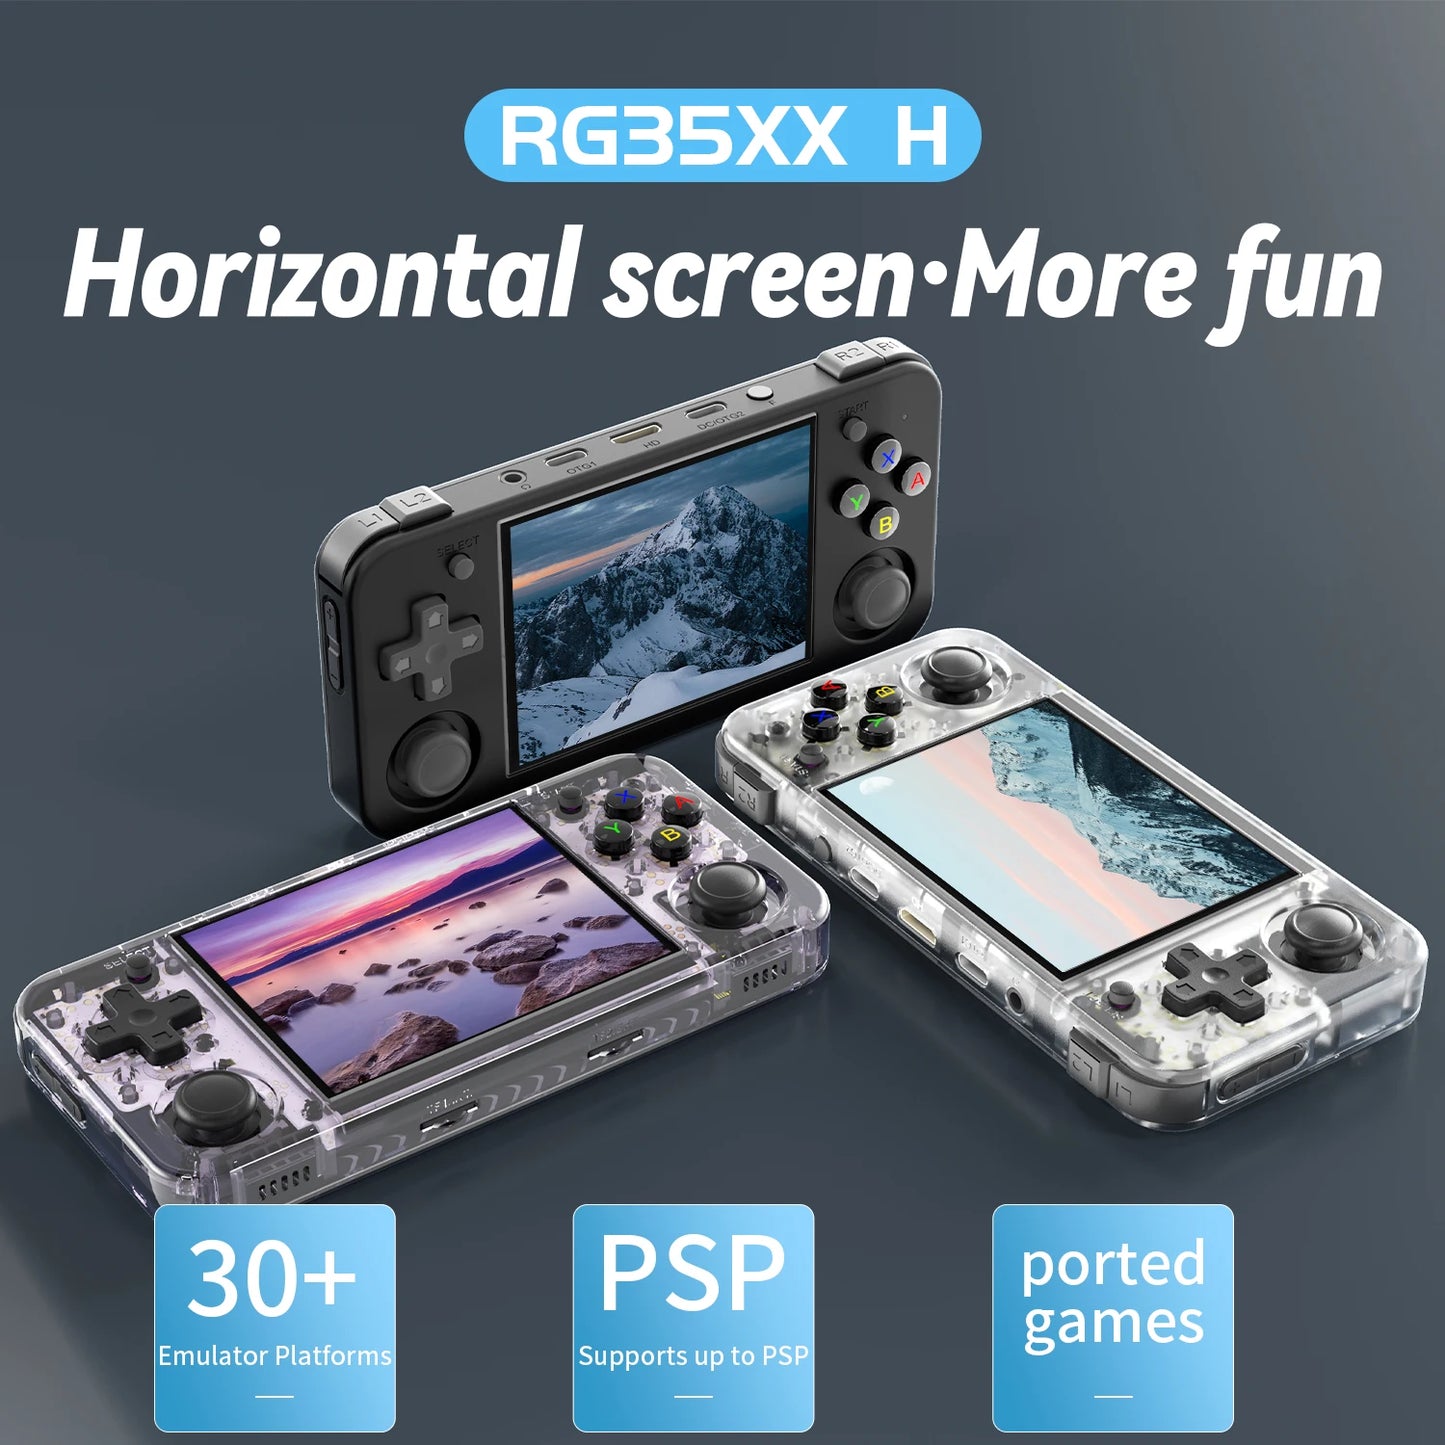 ANBERNIC RG35XX H Handheld Game Console 3.5-inch IPS Screen Linux H700 Retro Video Games Player 3300mAh 64G 5528 Classic Games